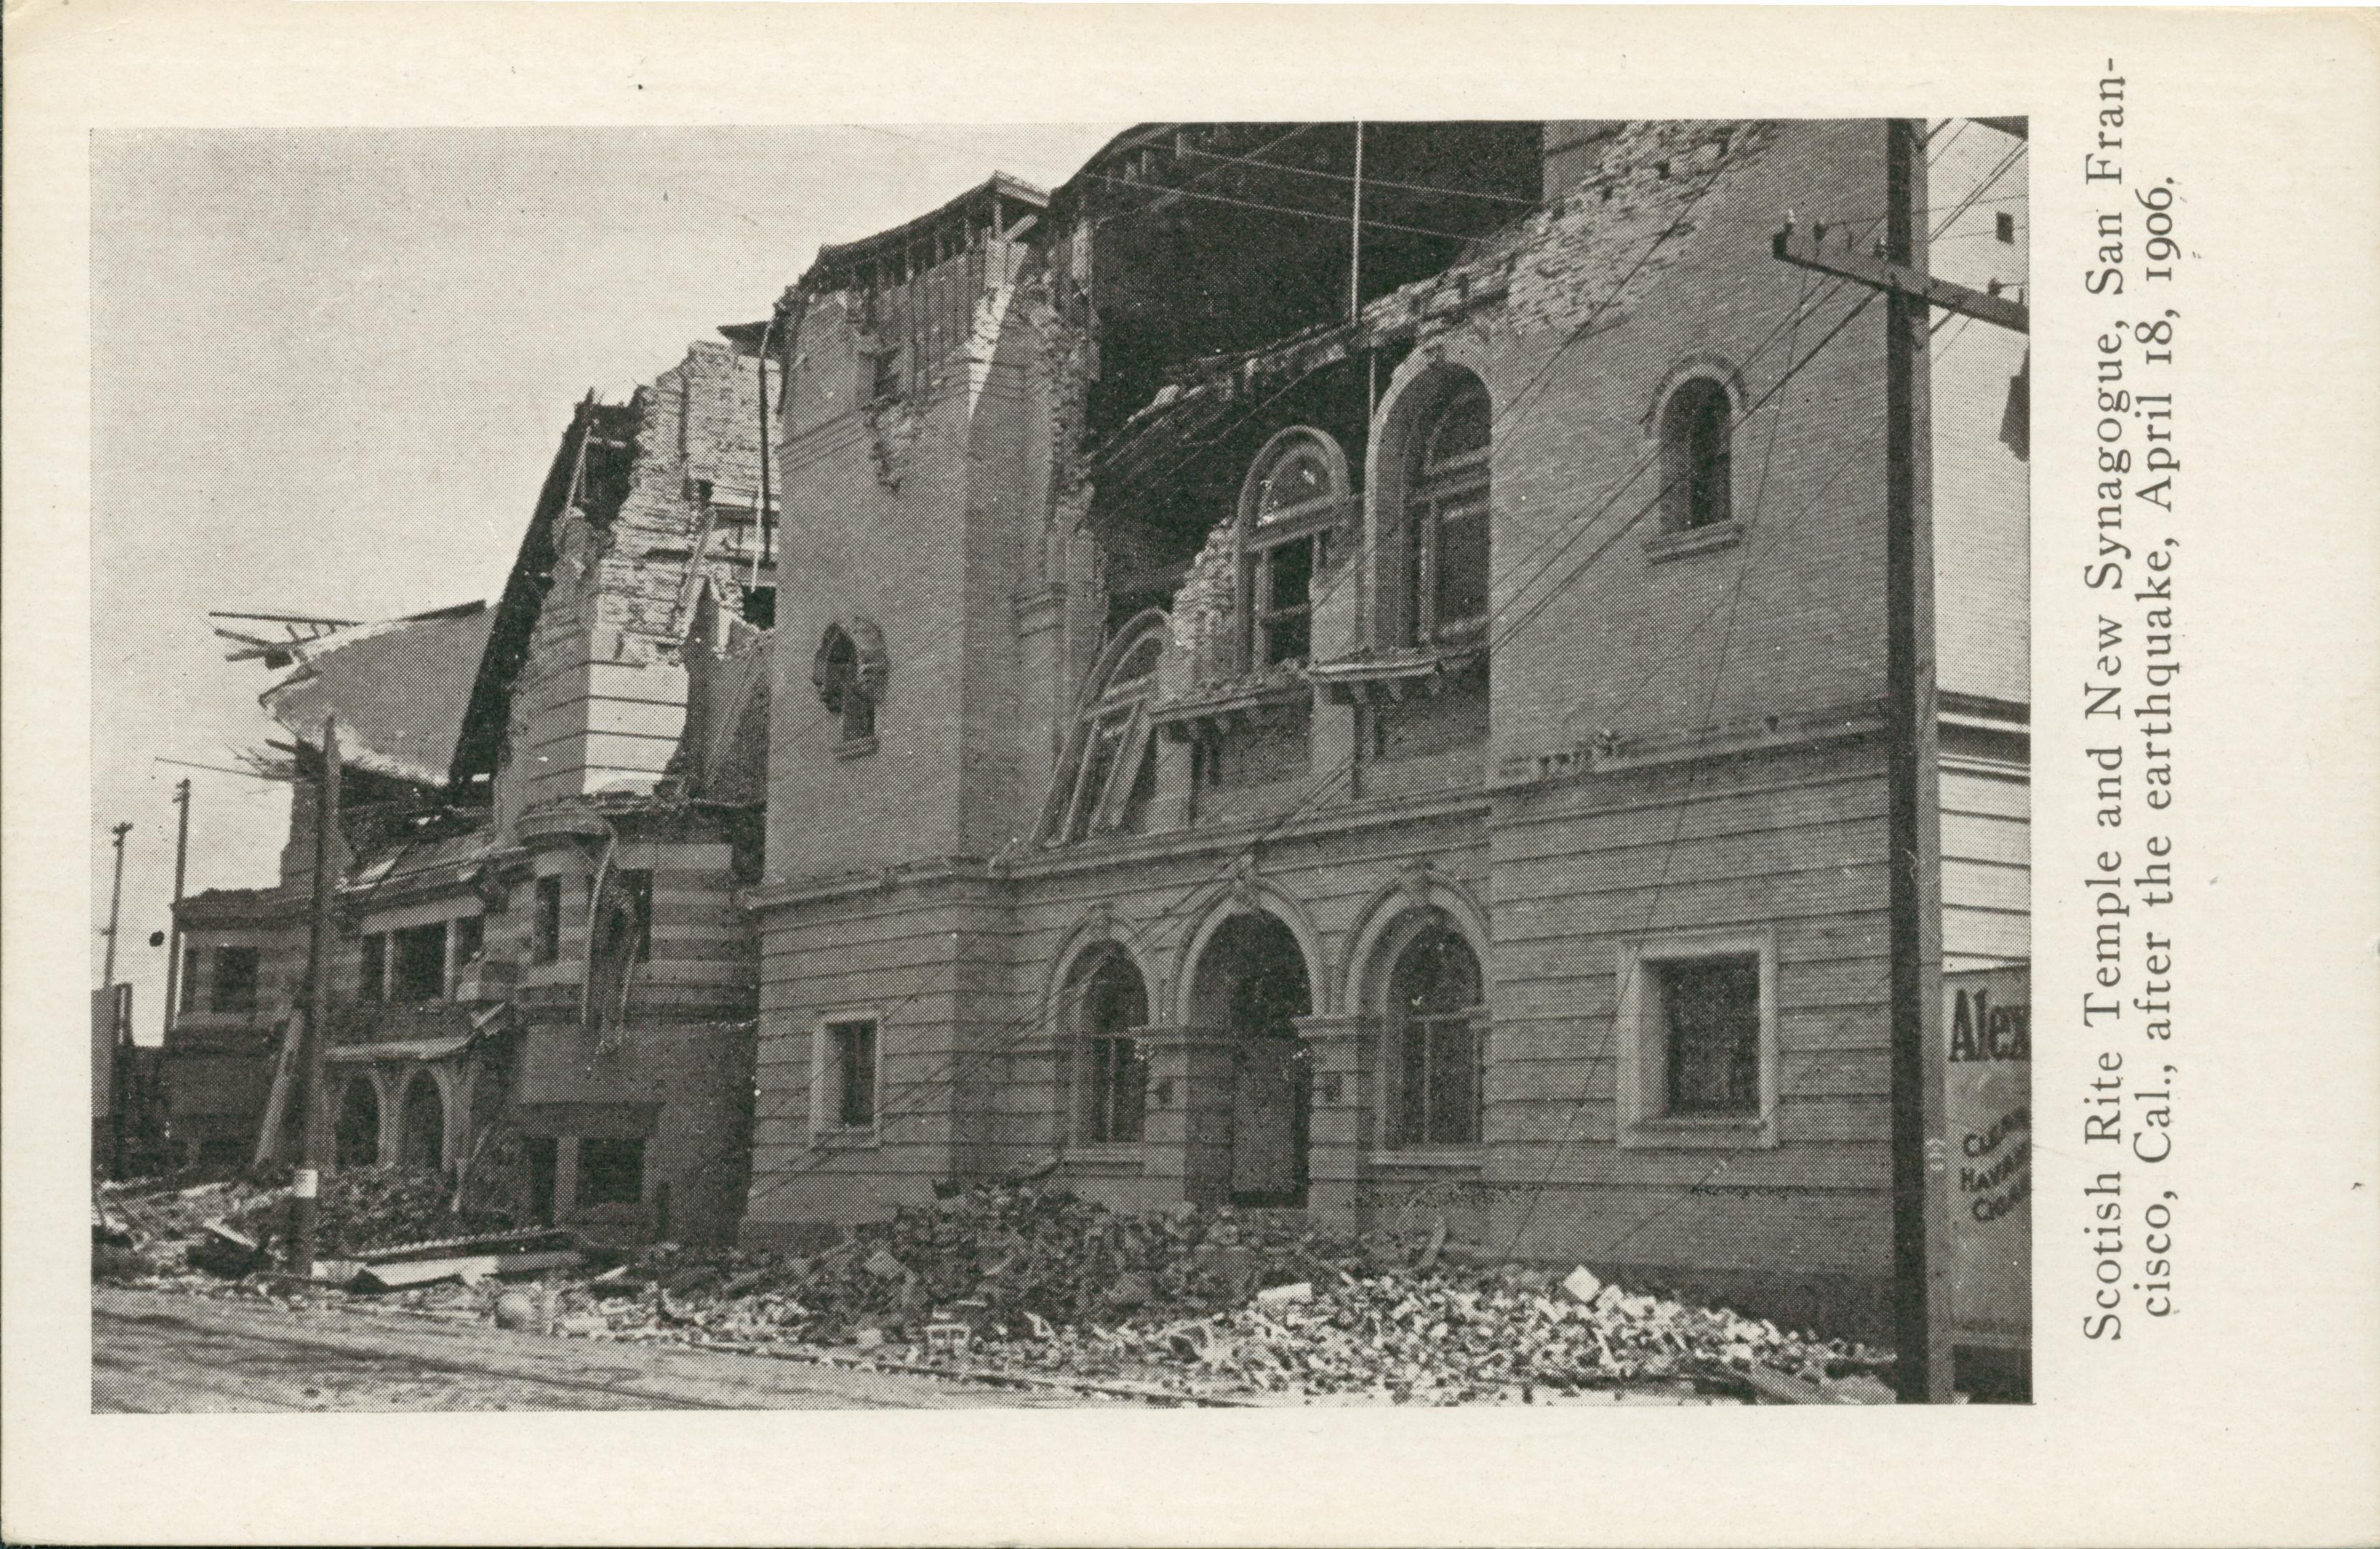 Photo of two damaged buildings with piles of rubble in front.